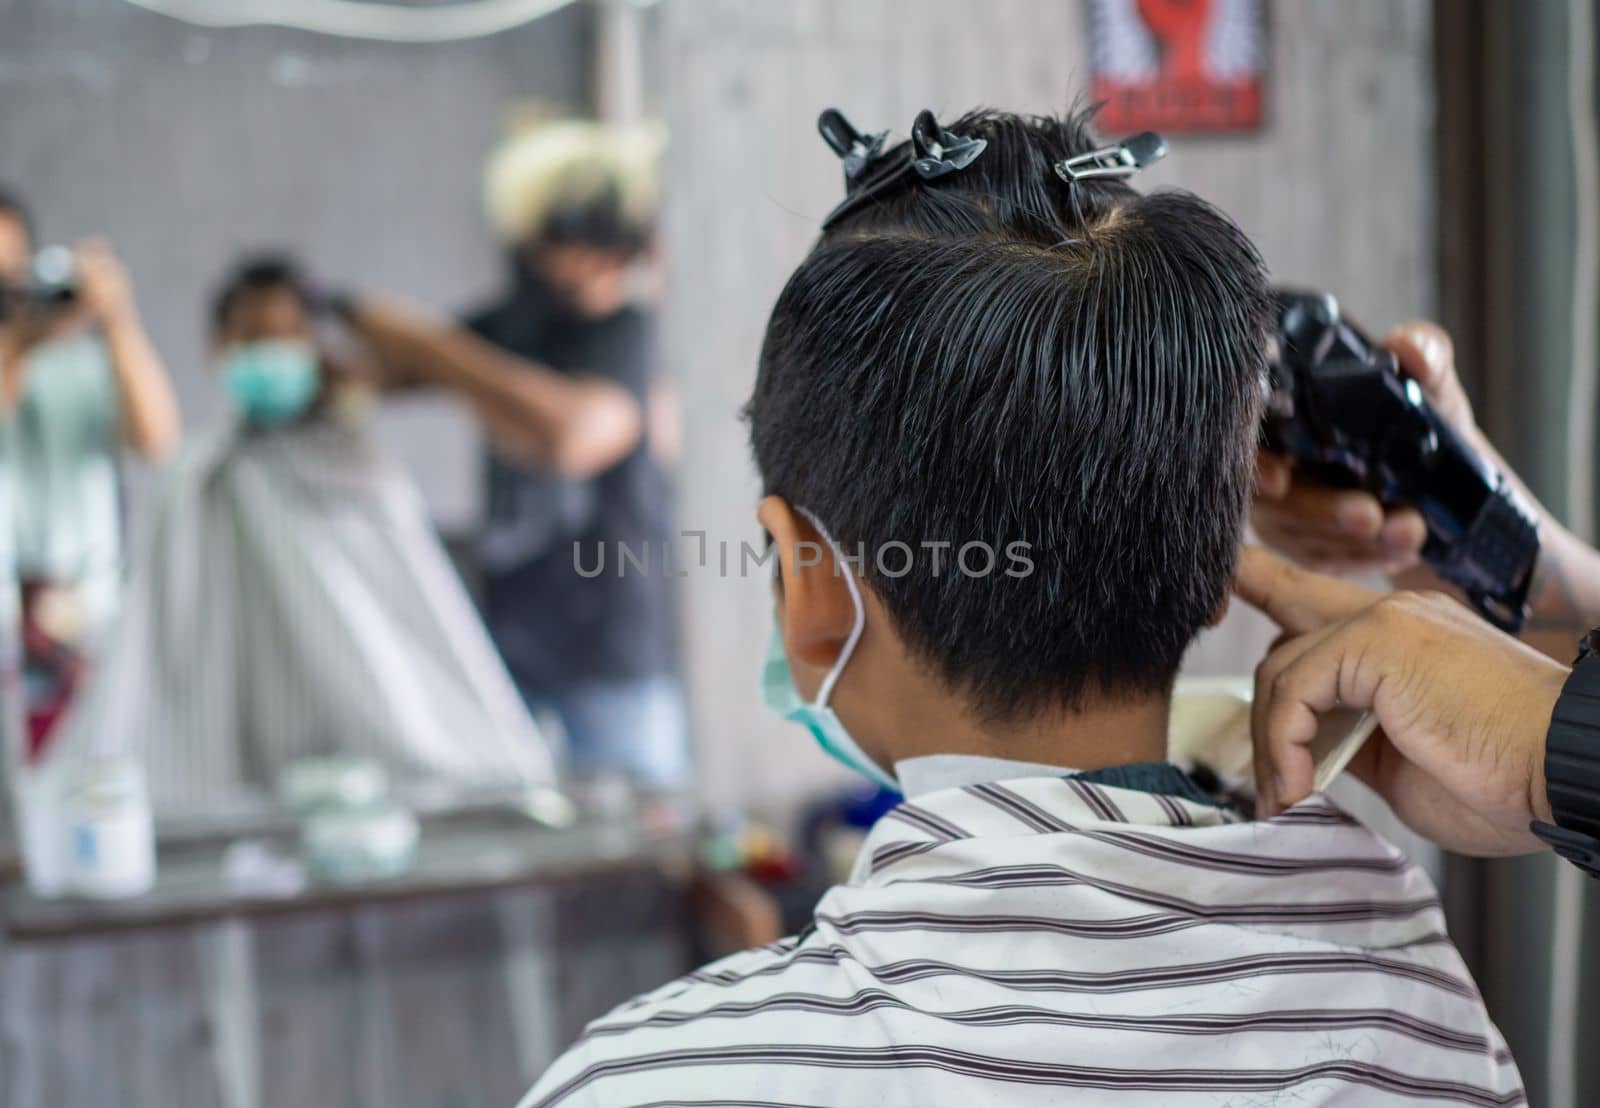 Teenage boy in a face protective mask is getting a haircut from a barbershop. Fashionable elongated haircuts for boys. Beauty salon in quarantine coronavirus covid-1 by Unimages2527